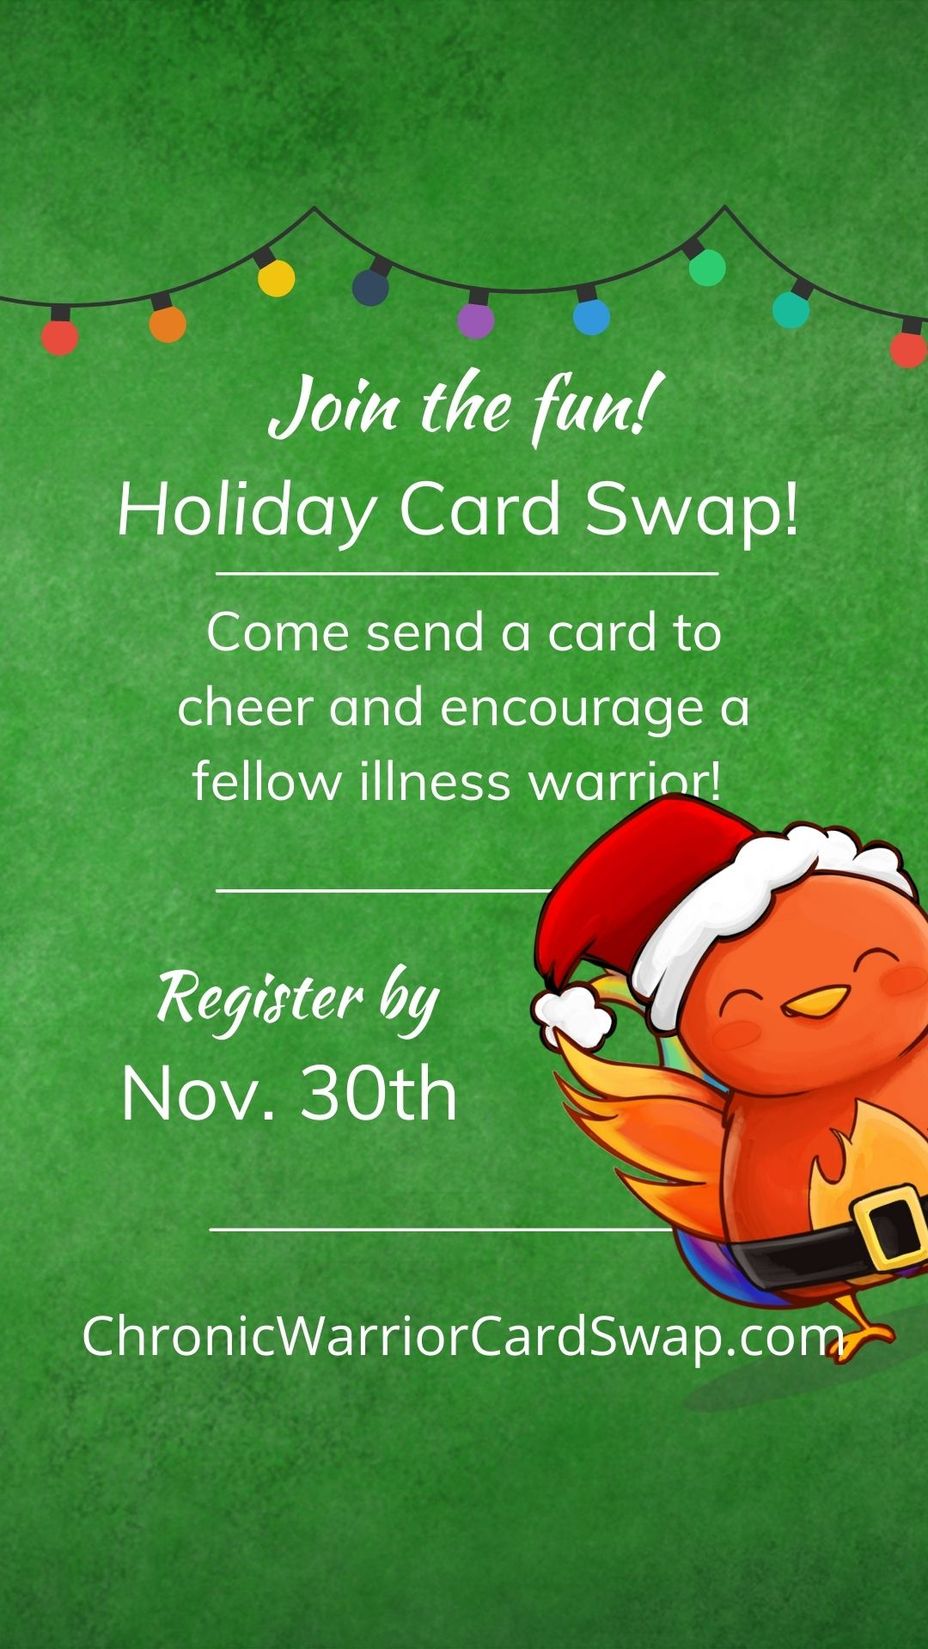 <p>Holiday Card Swap <a class="tm-topic-link mighty-topic" title="#MightyPets Community" href="/topic/mightypets/" data-id="5bbff887e4e4cc00ac2a02a2" data-name="#MightyPets Community" aria-label="hashtag #MightyPets Community">#MightyPets</a>  <a class="tm-topic-link mighty-topic" title="Mighty Cards" href="/topic/mightycards/" data-id="5c50fb8281091000c9fcceee" data-name="Mighty Cards" aria-label="hashtag Mighty Cards">#MightyCards</a>  <a class="tm-topic-link mighty-topic" title="Chronic Illness" href="/topic/chronic-illness/" data-id="5b23ce6f00553f33fe98fe39" data-name="Chronic Illness" aria-label="hashtag Chronic Illness">#ChronicIllness</a>  <a class="tm-topic-link mighty-topic" title="Chronic Pain" href="/topic/chronic-pain/" data-id="5b23ce6f00553f33fe98ff5b" data-name="Chronic Pain" aria-label="hashtag Chronic Pain">#ChronicPain</a>  <a class="tm-topic-link ugc-topic" title="RLS" href="/topic/rls/" data-id="5b23ceb200553f33fe99b993" data-name="RLS" aria-label="hashtag RLS">#RLS</a>  <a class="tm-topic-link mighty-topic" title="Fibromyalgia" href="/topic/fibromyalgia/" data-id="5b23ce7f00553f33fe992ab1" data-name="Fibromyalgia" aria-label="hashtag Fibromyalgia">#Fibromyalgia</a> </p>